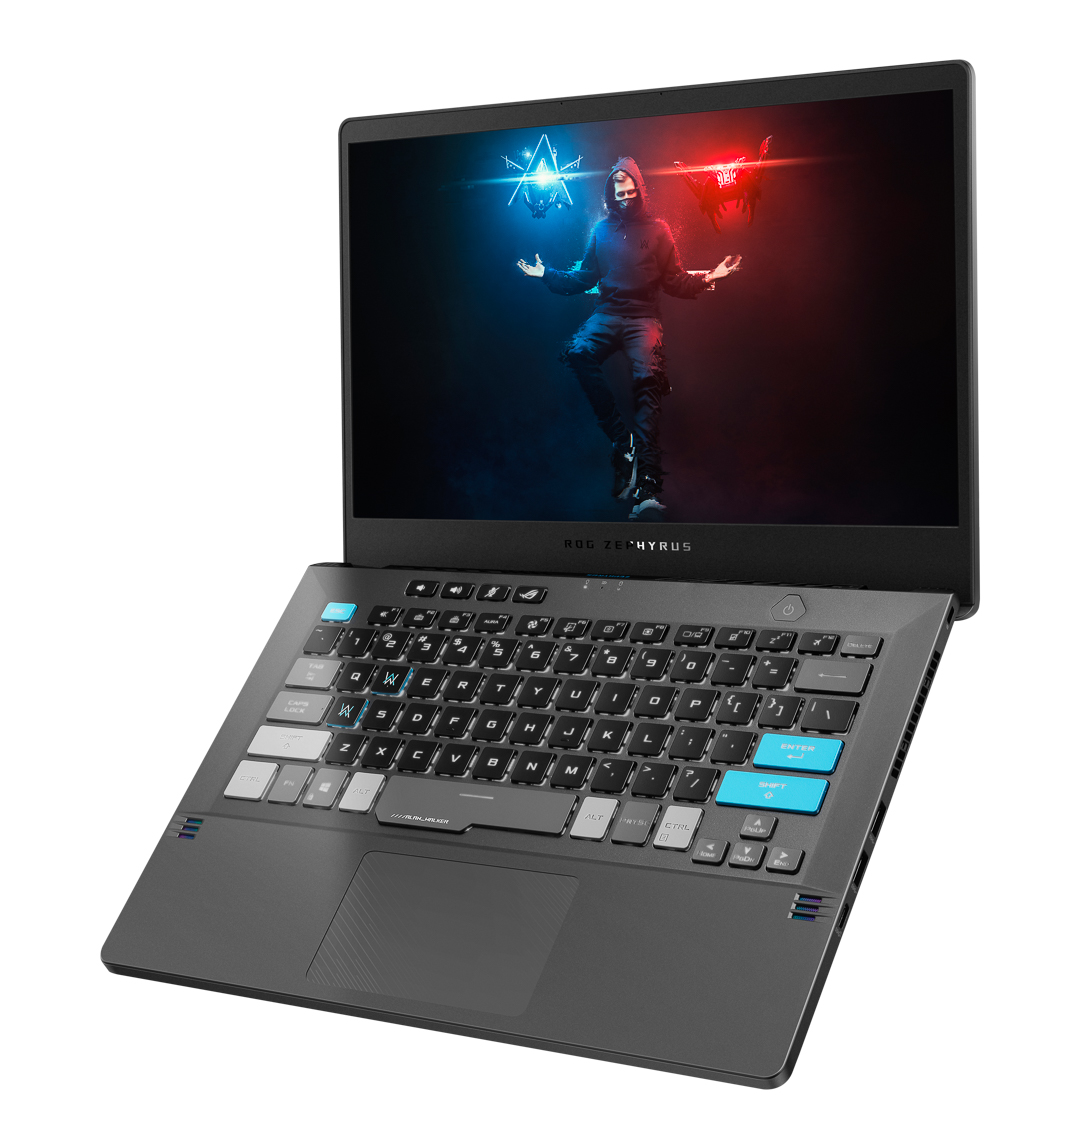 ASUS Prices ROG Zephyrus G14 Alan Walker Edition in the Philippines